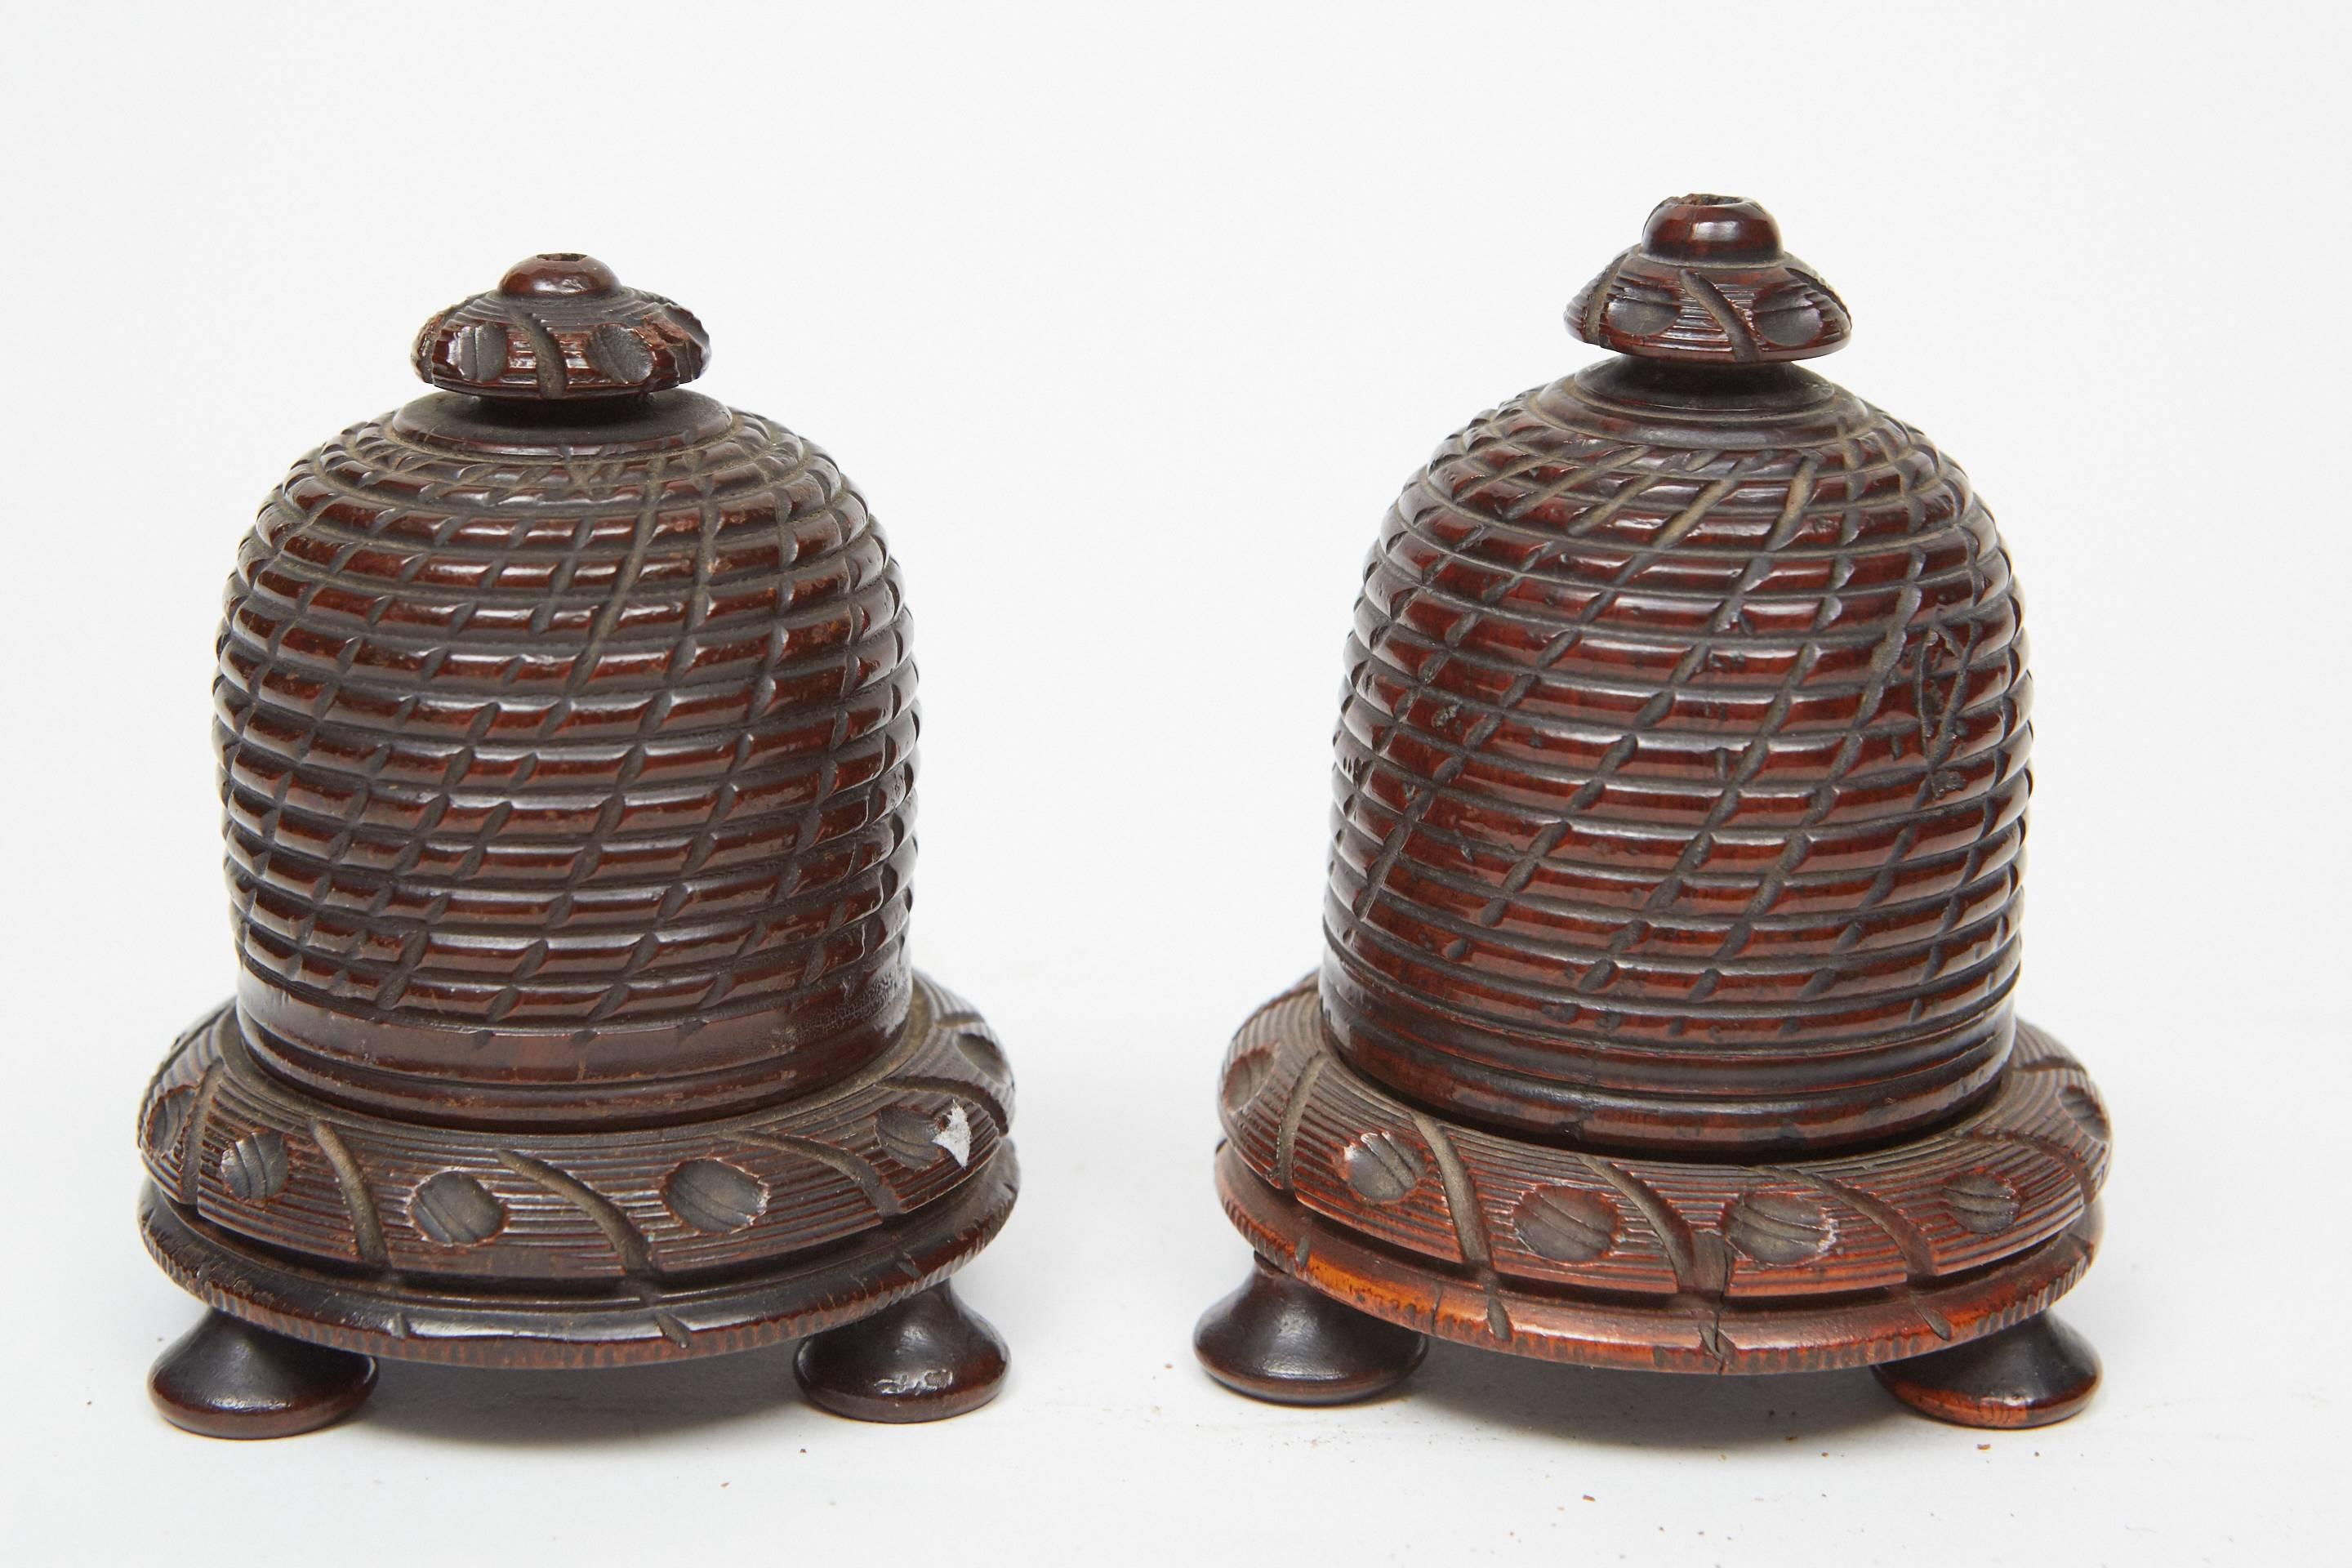 These beautiful 19th century hand-carved beehives have wonderful details throughout. They were made to store balls of string that would be pulled up through the hole in the top. They are priced per piece and are slightly different sizes, see